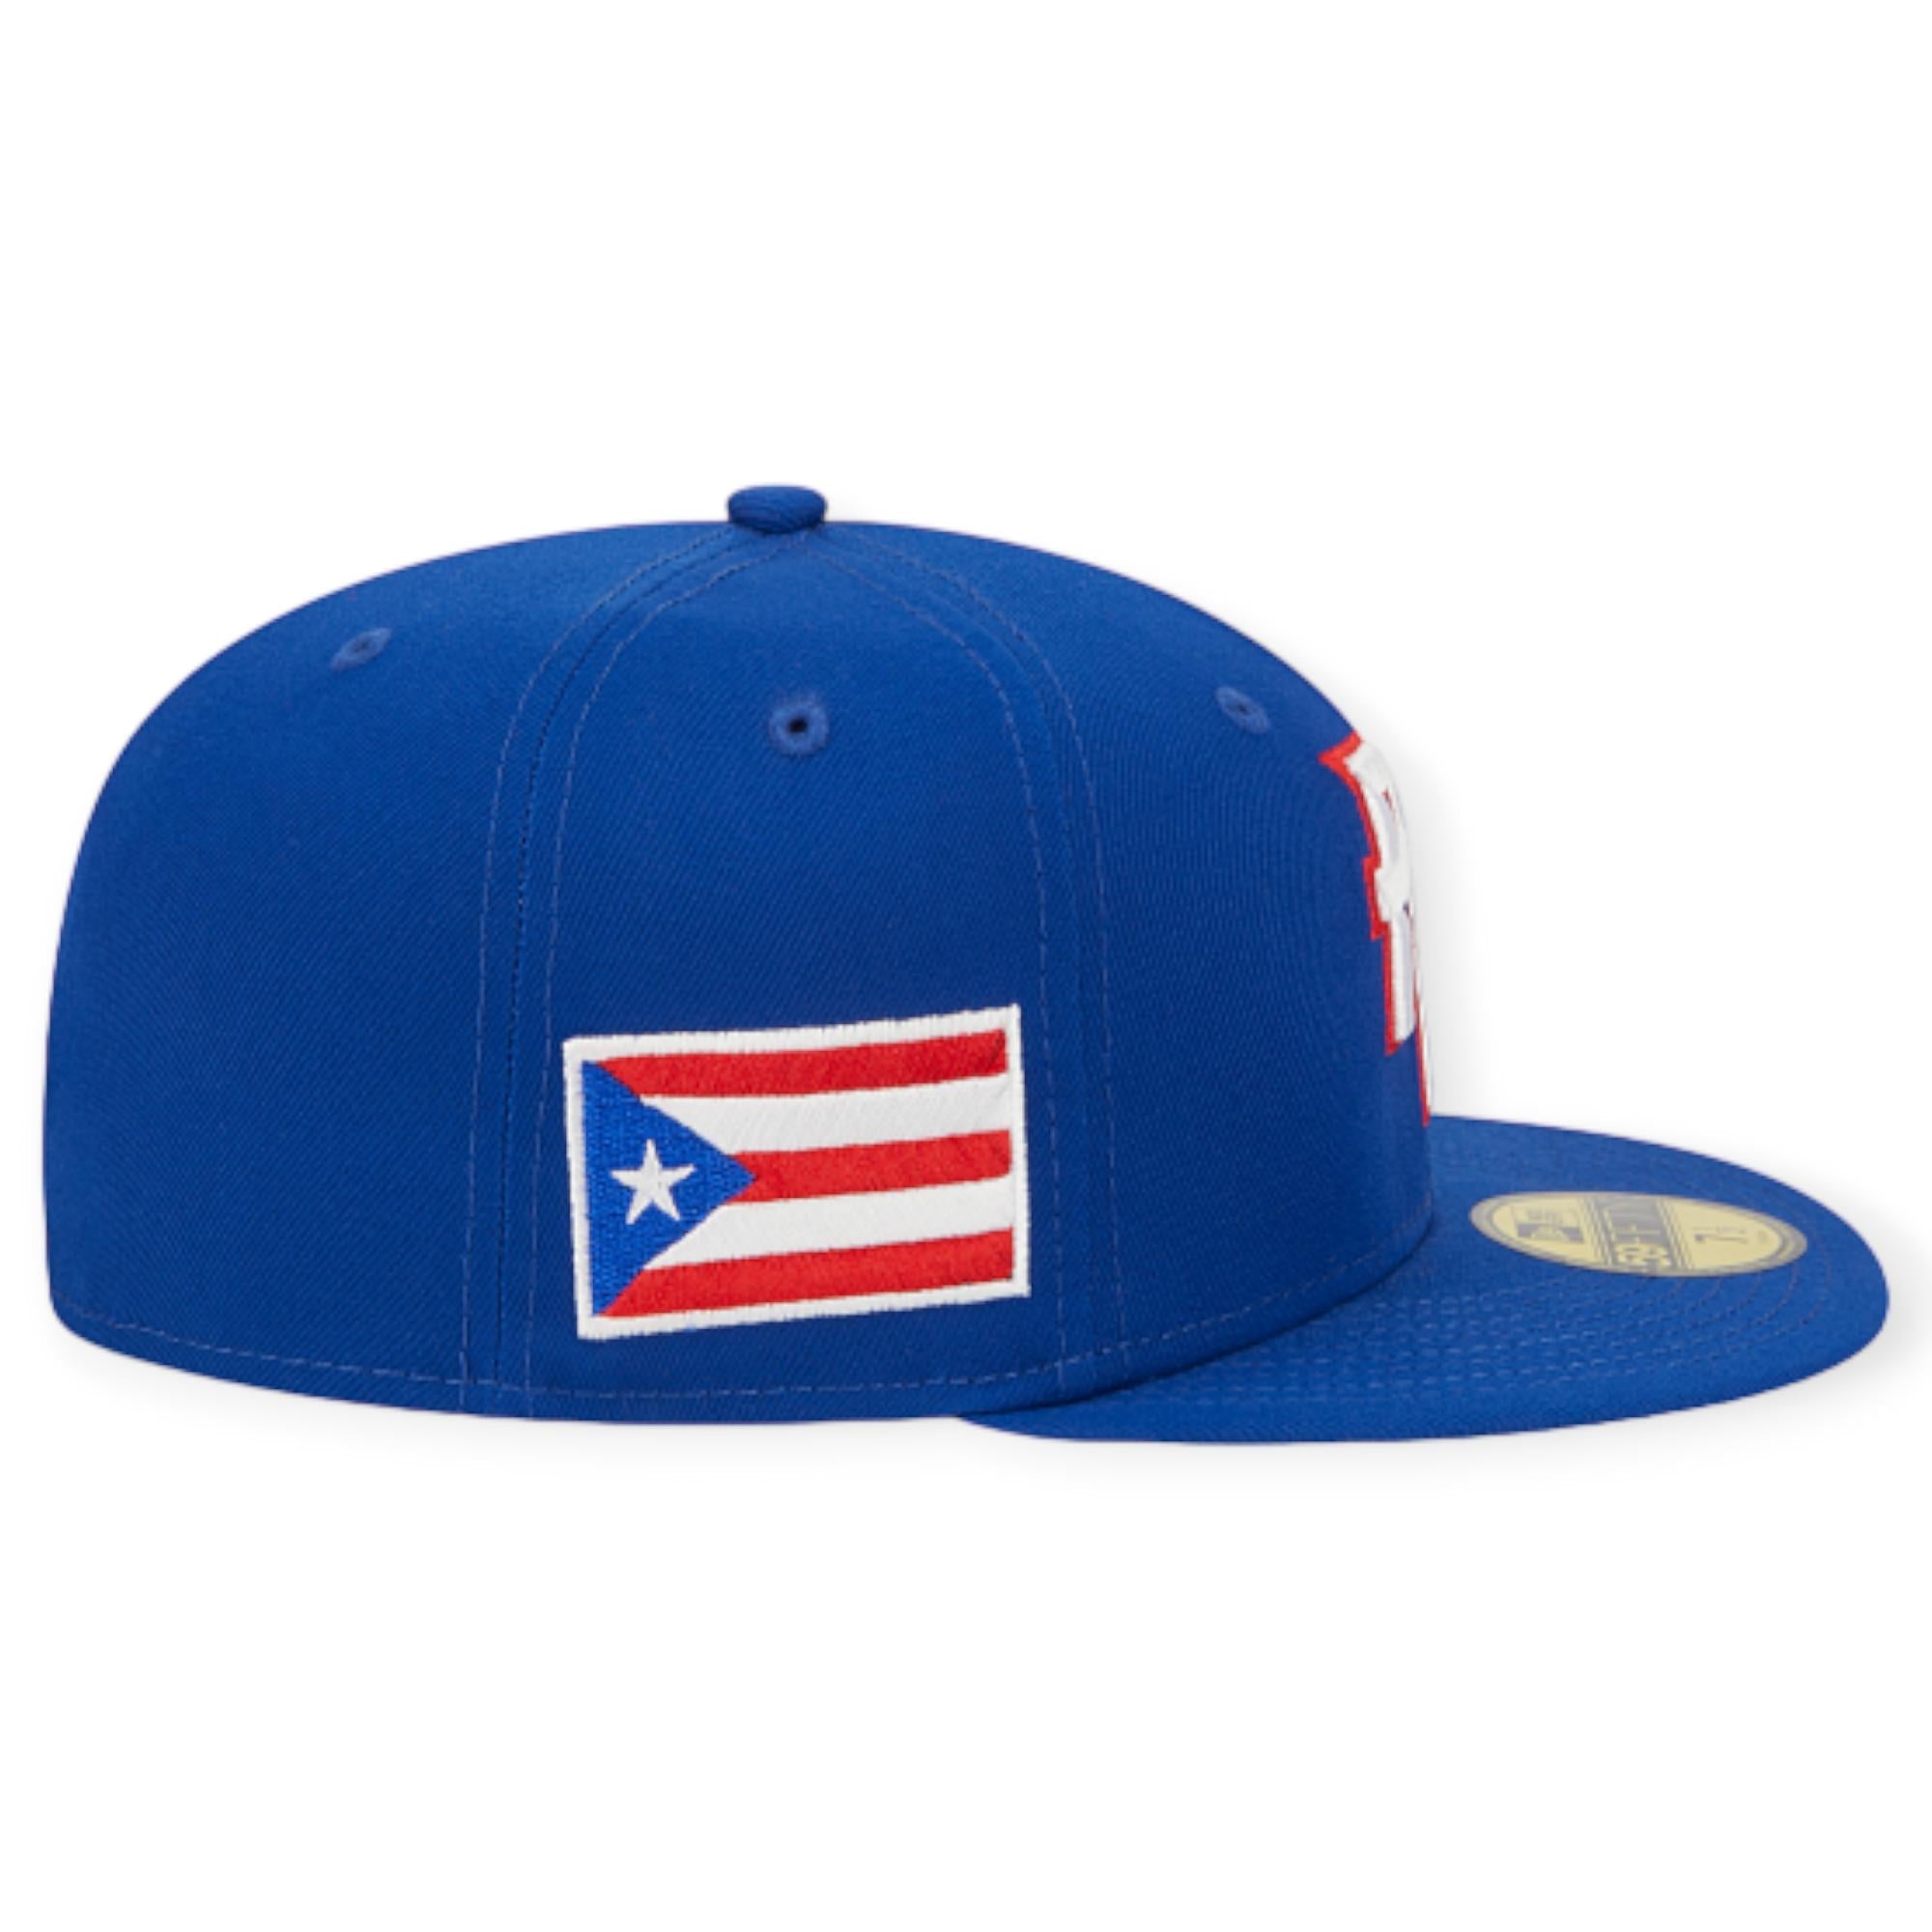 New Era Puerto Rico World Baseball Classic 59FIFTY Fitted Hat (Blue) 5